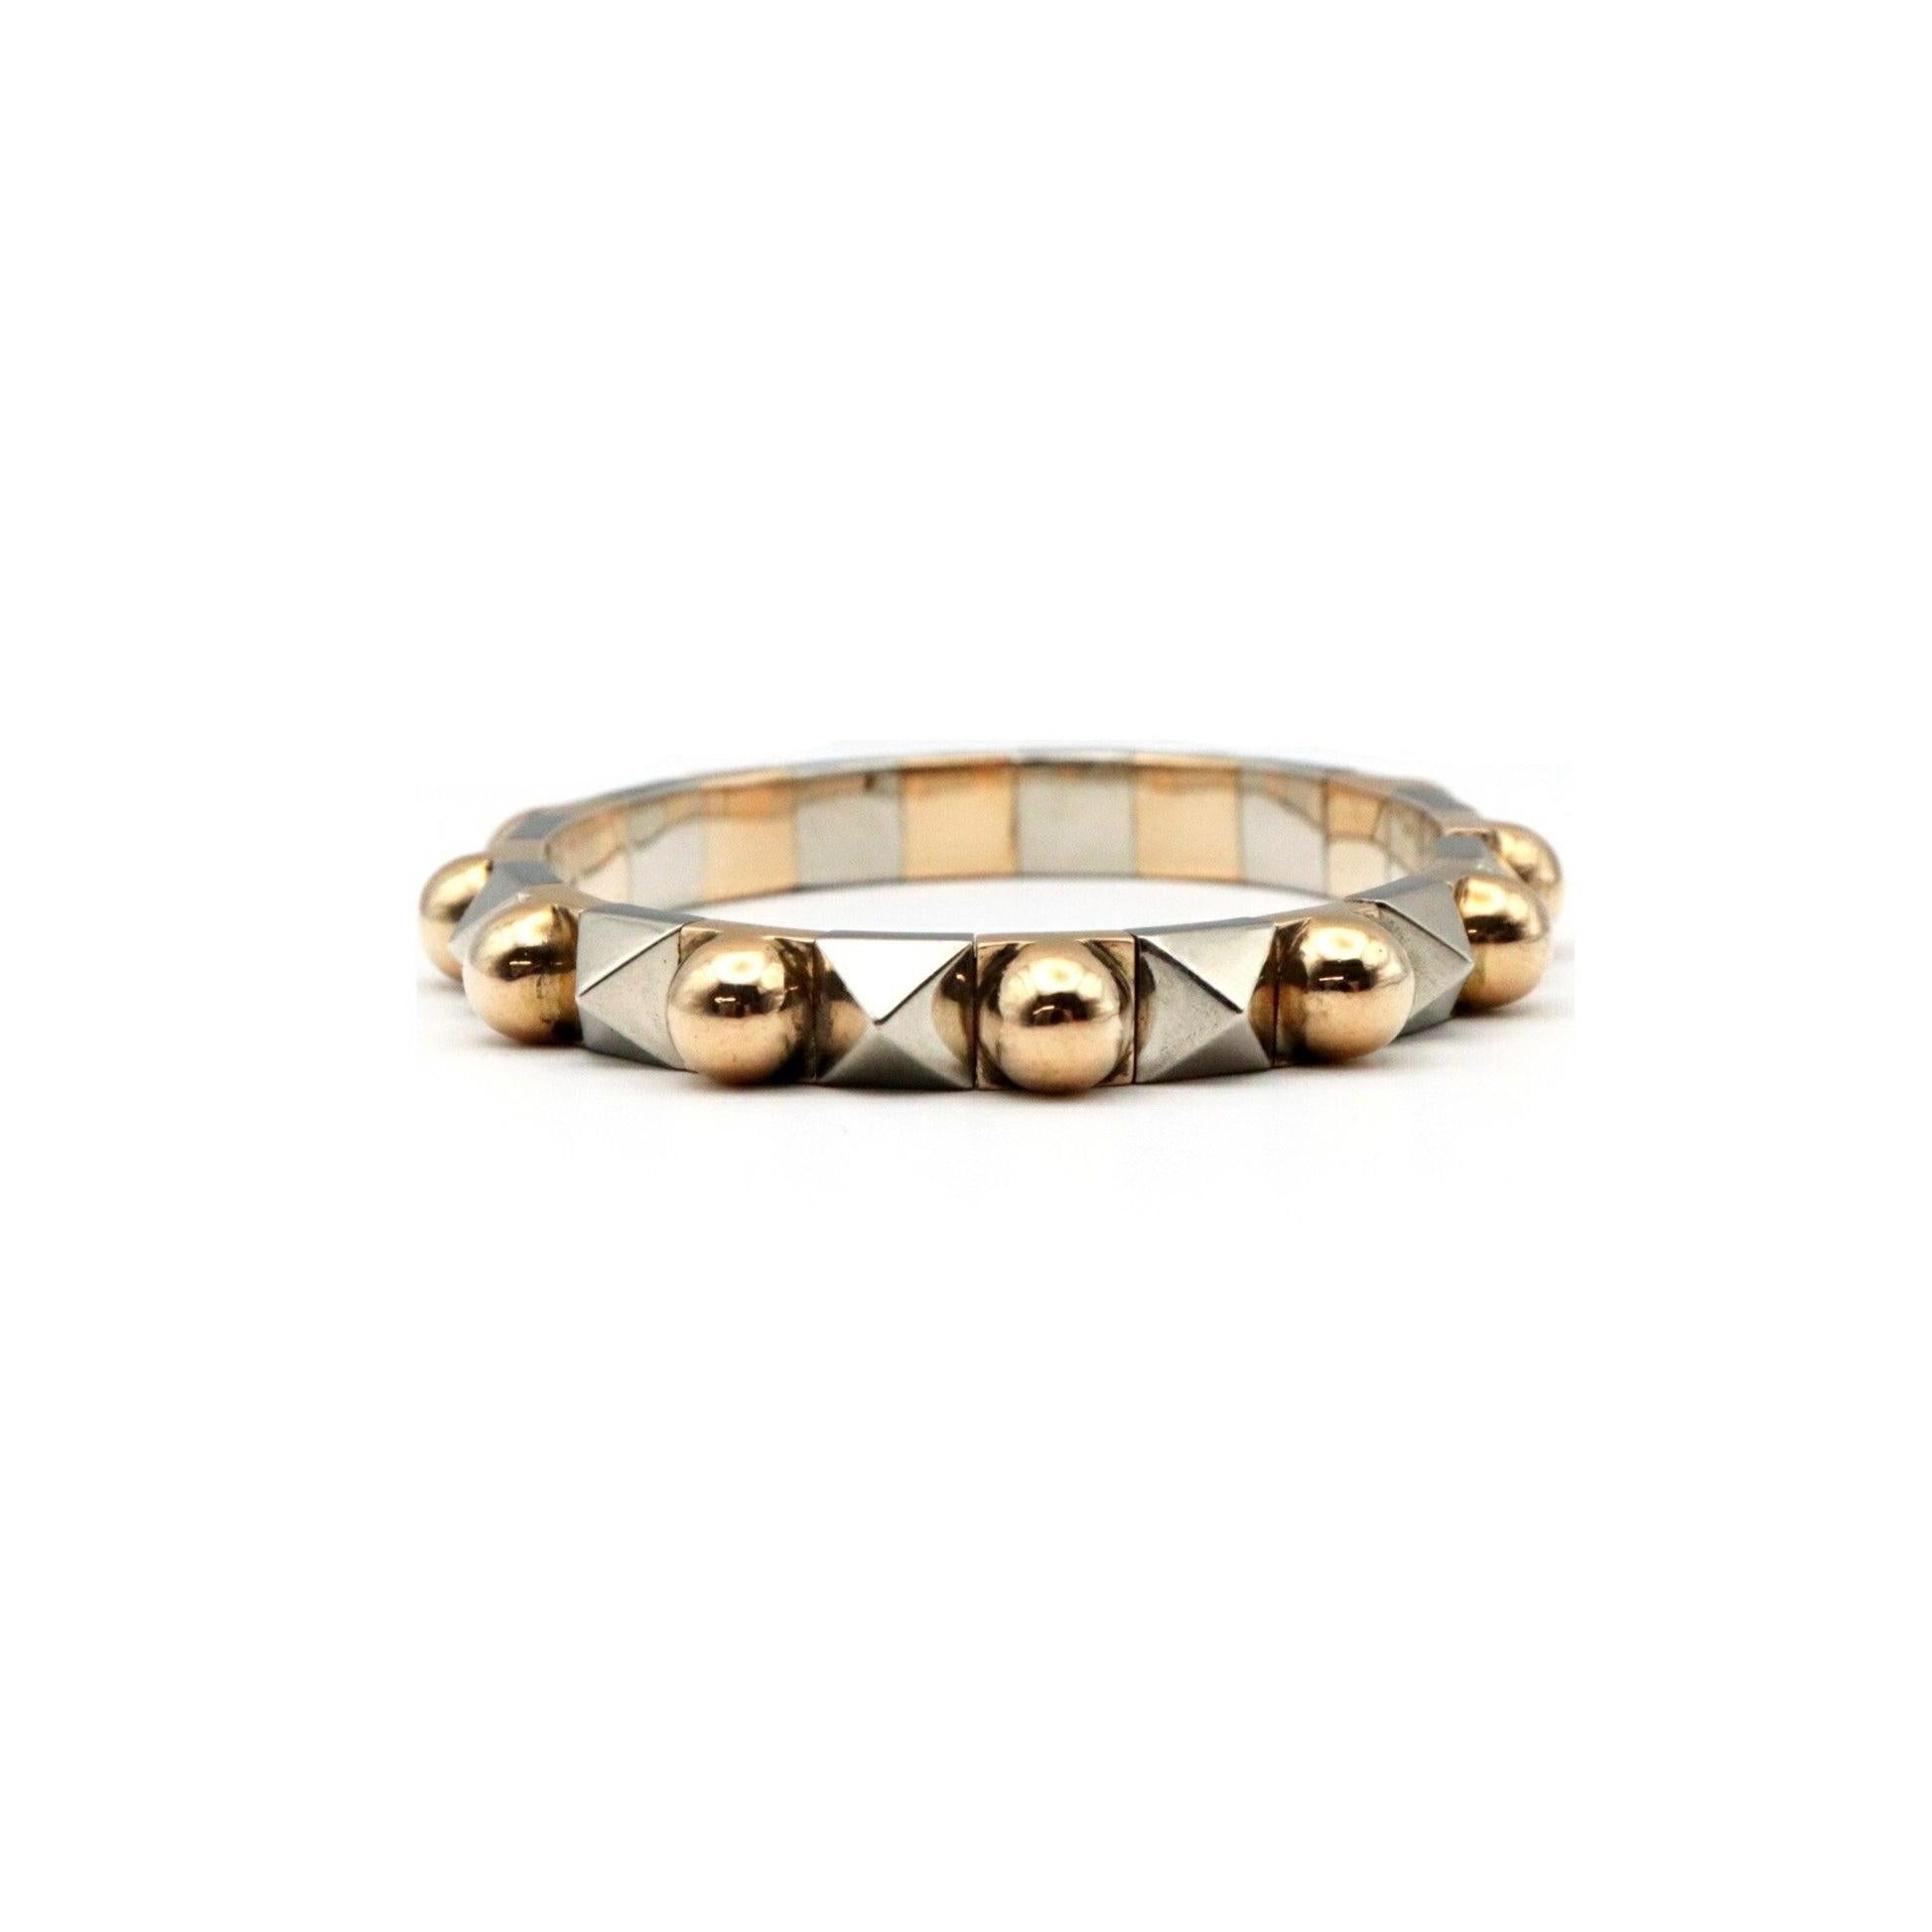 Bvlgari Vintage Studs Bangle in 18K Yellow Gold And White Gold

Additional Information:
Brand: Bvlgari
Gender: Women
Material: White gold (18K), Yellow gold (18K)
Condition: Fair
Condition details: The item has been well loved and may have more